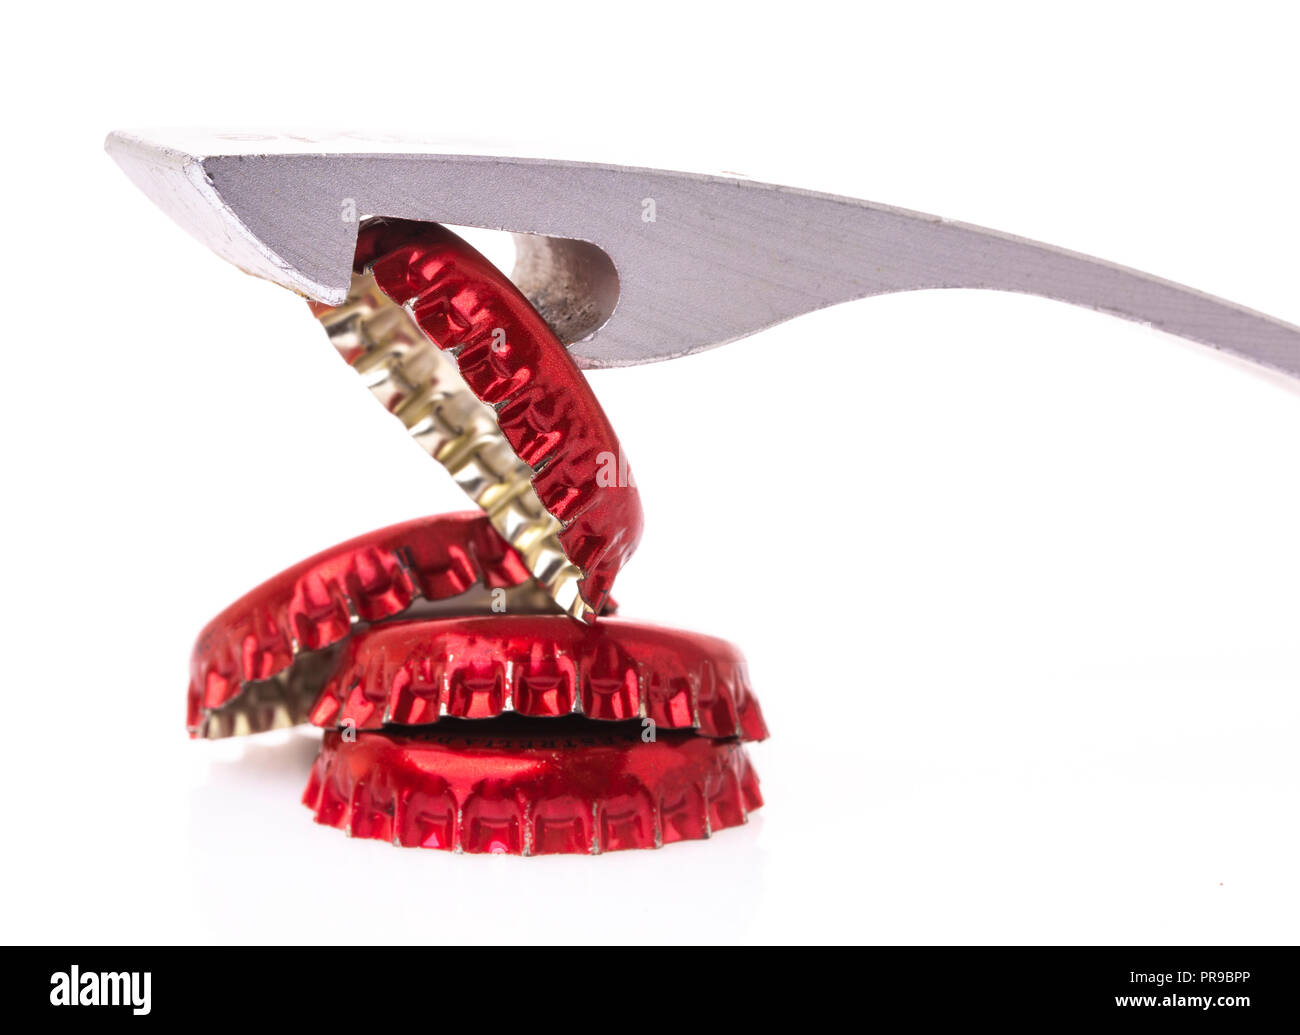 Bottle opener with red bottle tops on a white background Stock Photo